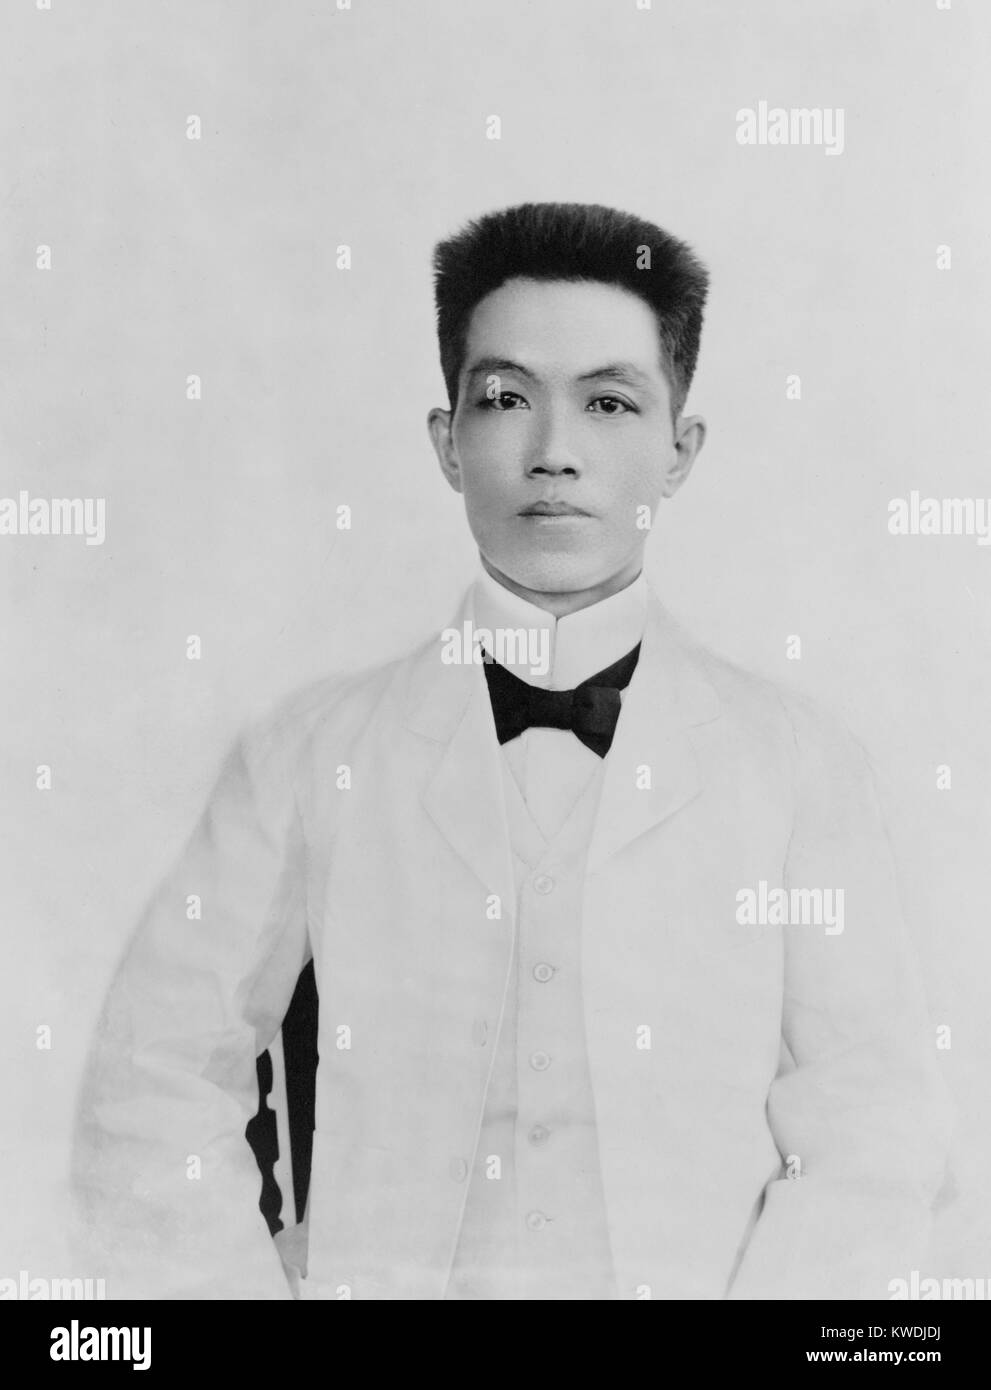 Emilio Aguinaldo, Philippine nationalist and President of the First Philippine Republic. He led rebellions against Spanish and American colonial occupations from 1896-1900. He is considered the first President of the Philippines, from his election by anti-Spanish Rebels at the Tejeros Convention, on March 22, 1897 (BSLOC 2017 10 69) Stock Photo